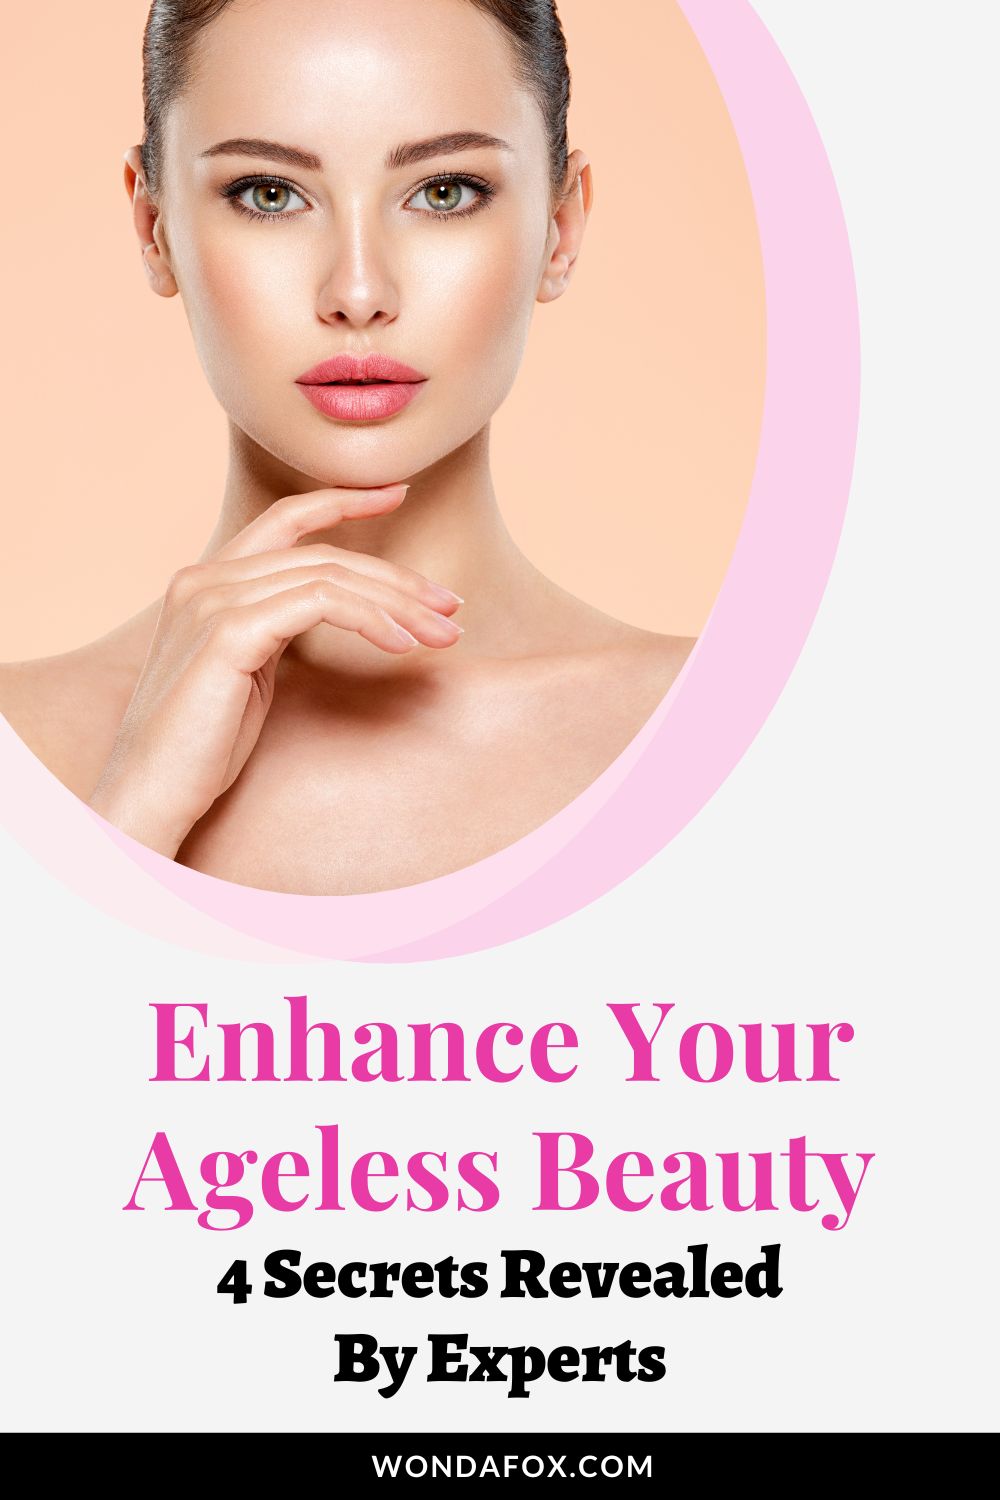 Enhance Your Ageless Beauty: 4 Secrets Revealed By Experts